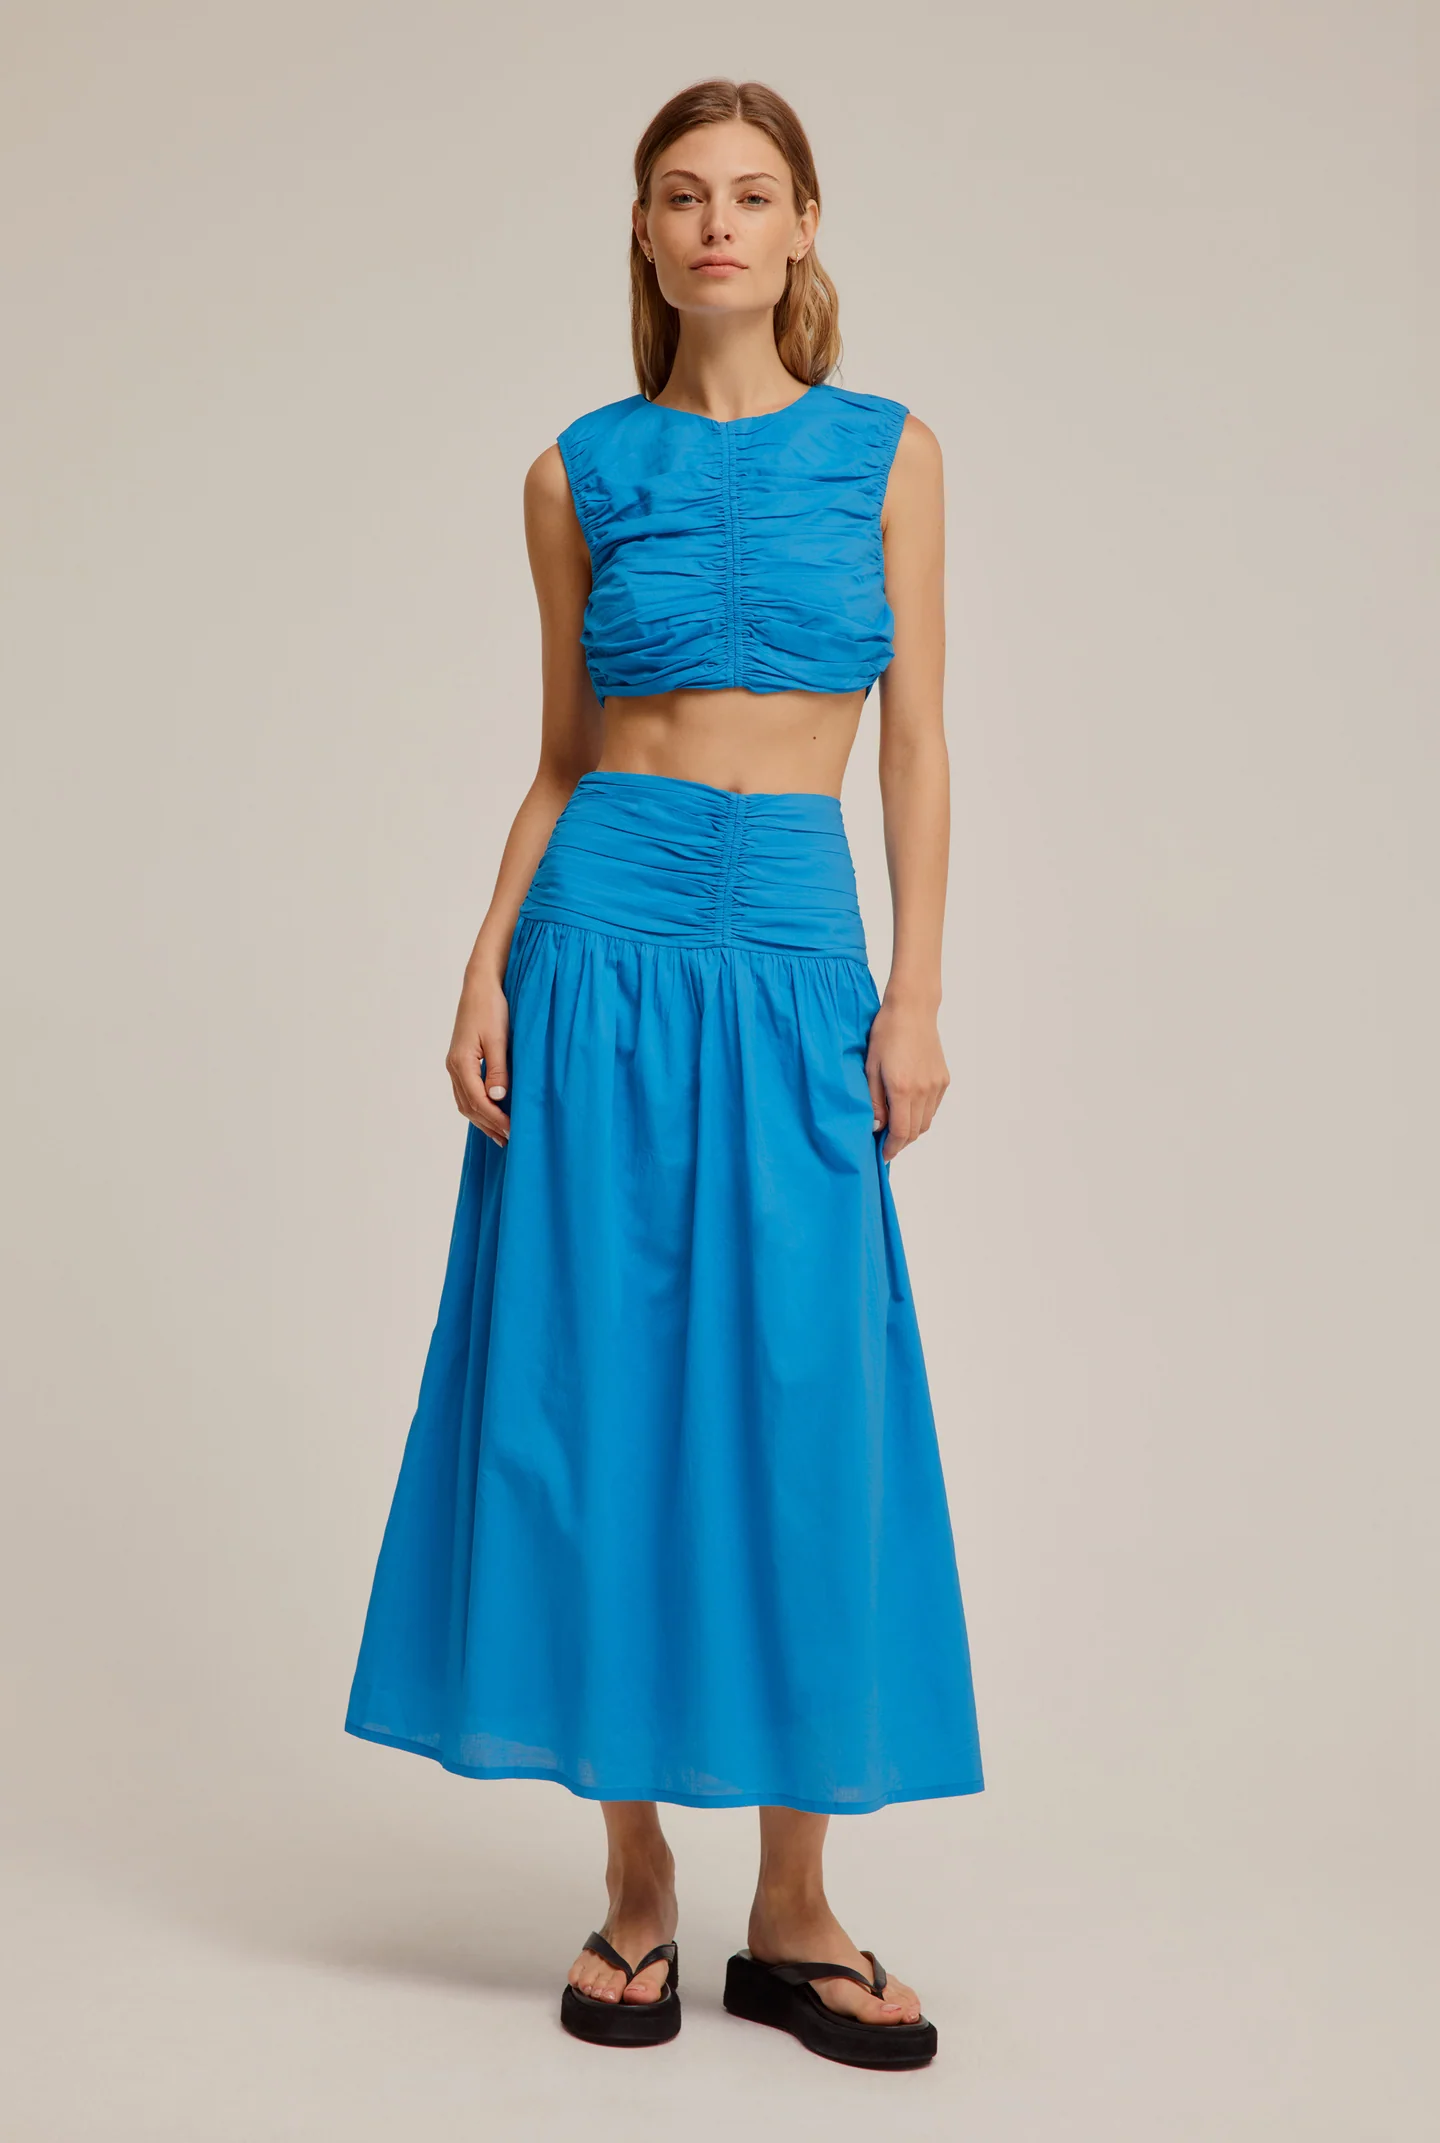 Sleeveless, blue maxi set by Venroy for hire.